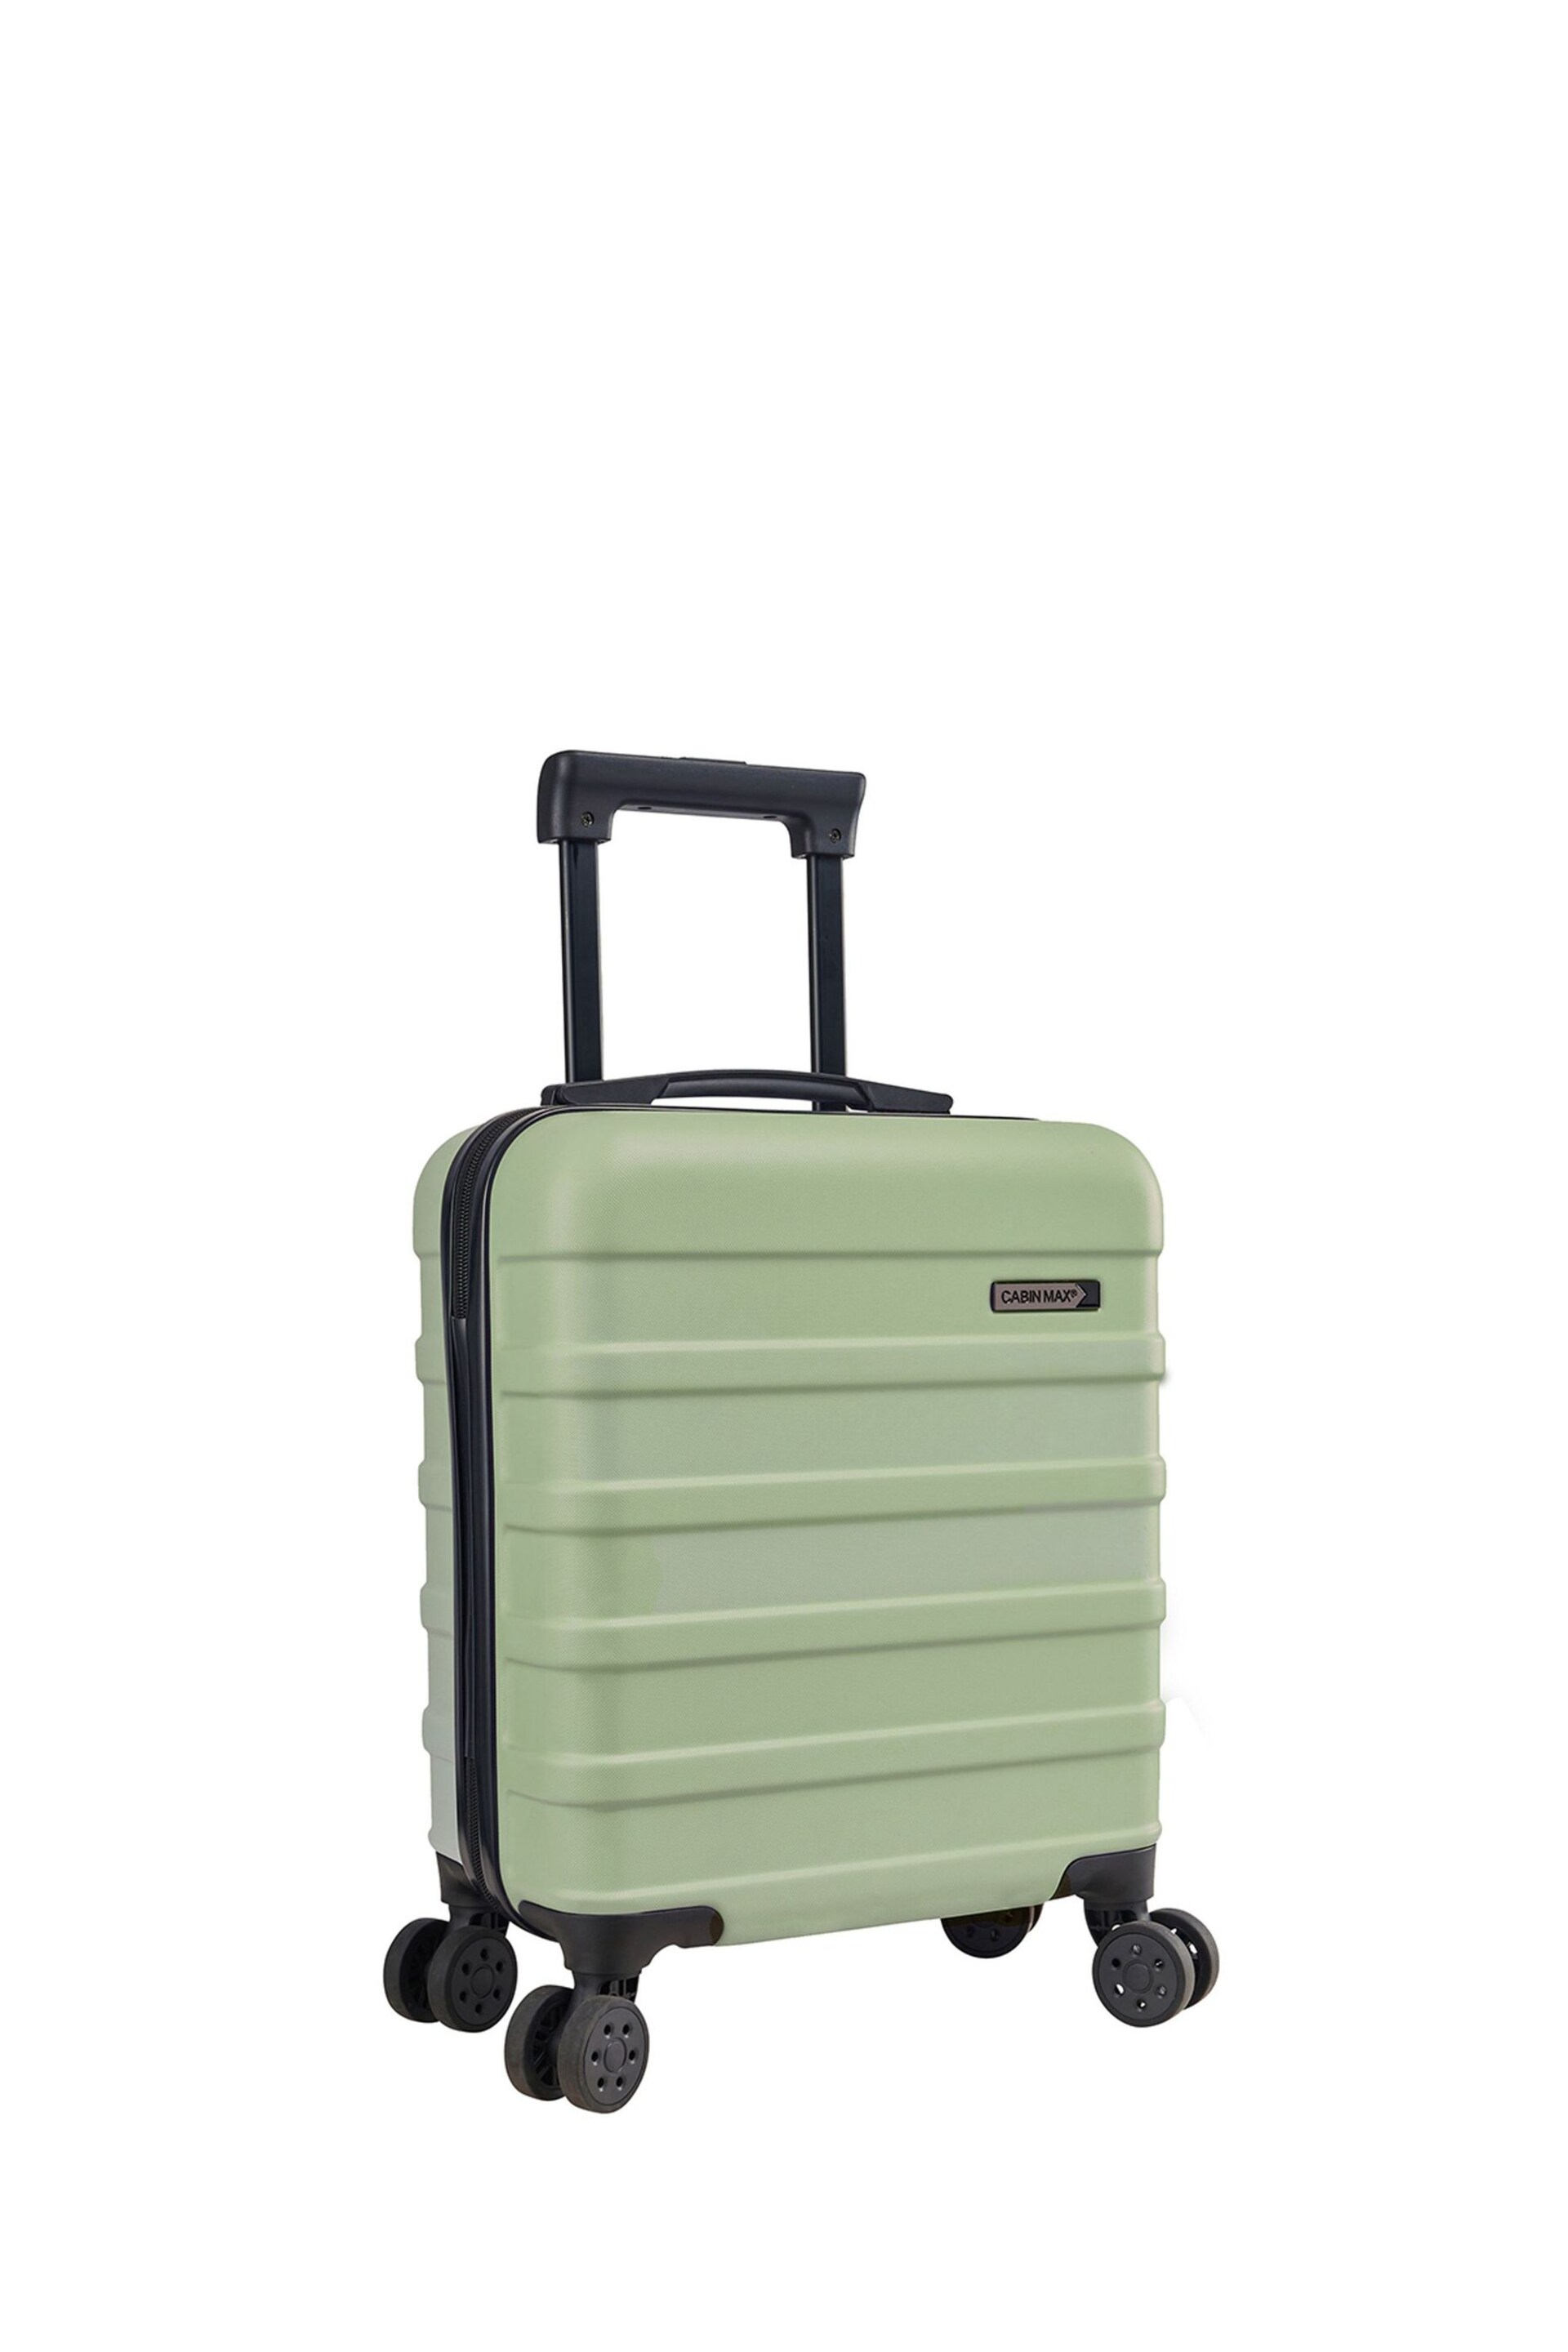 Cabin Max Anode Four Wheel Carry On Easyjet Sized Underseat 45cm Suitcase - Image 5 of 6